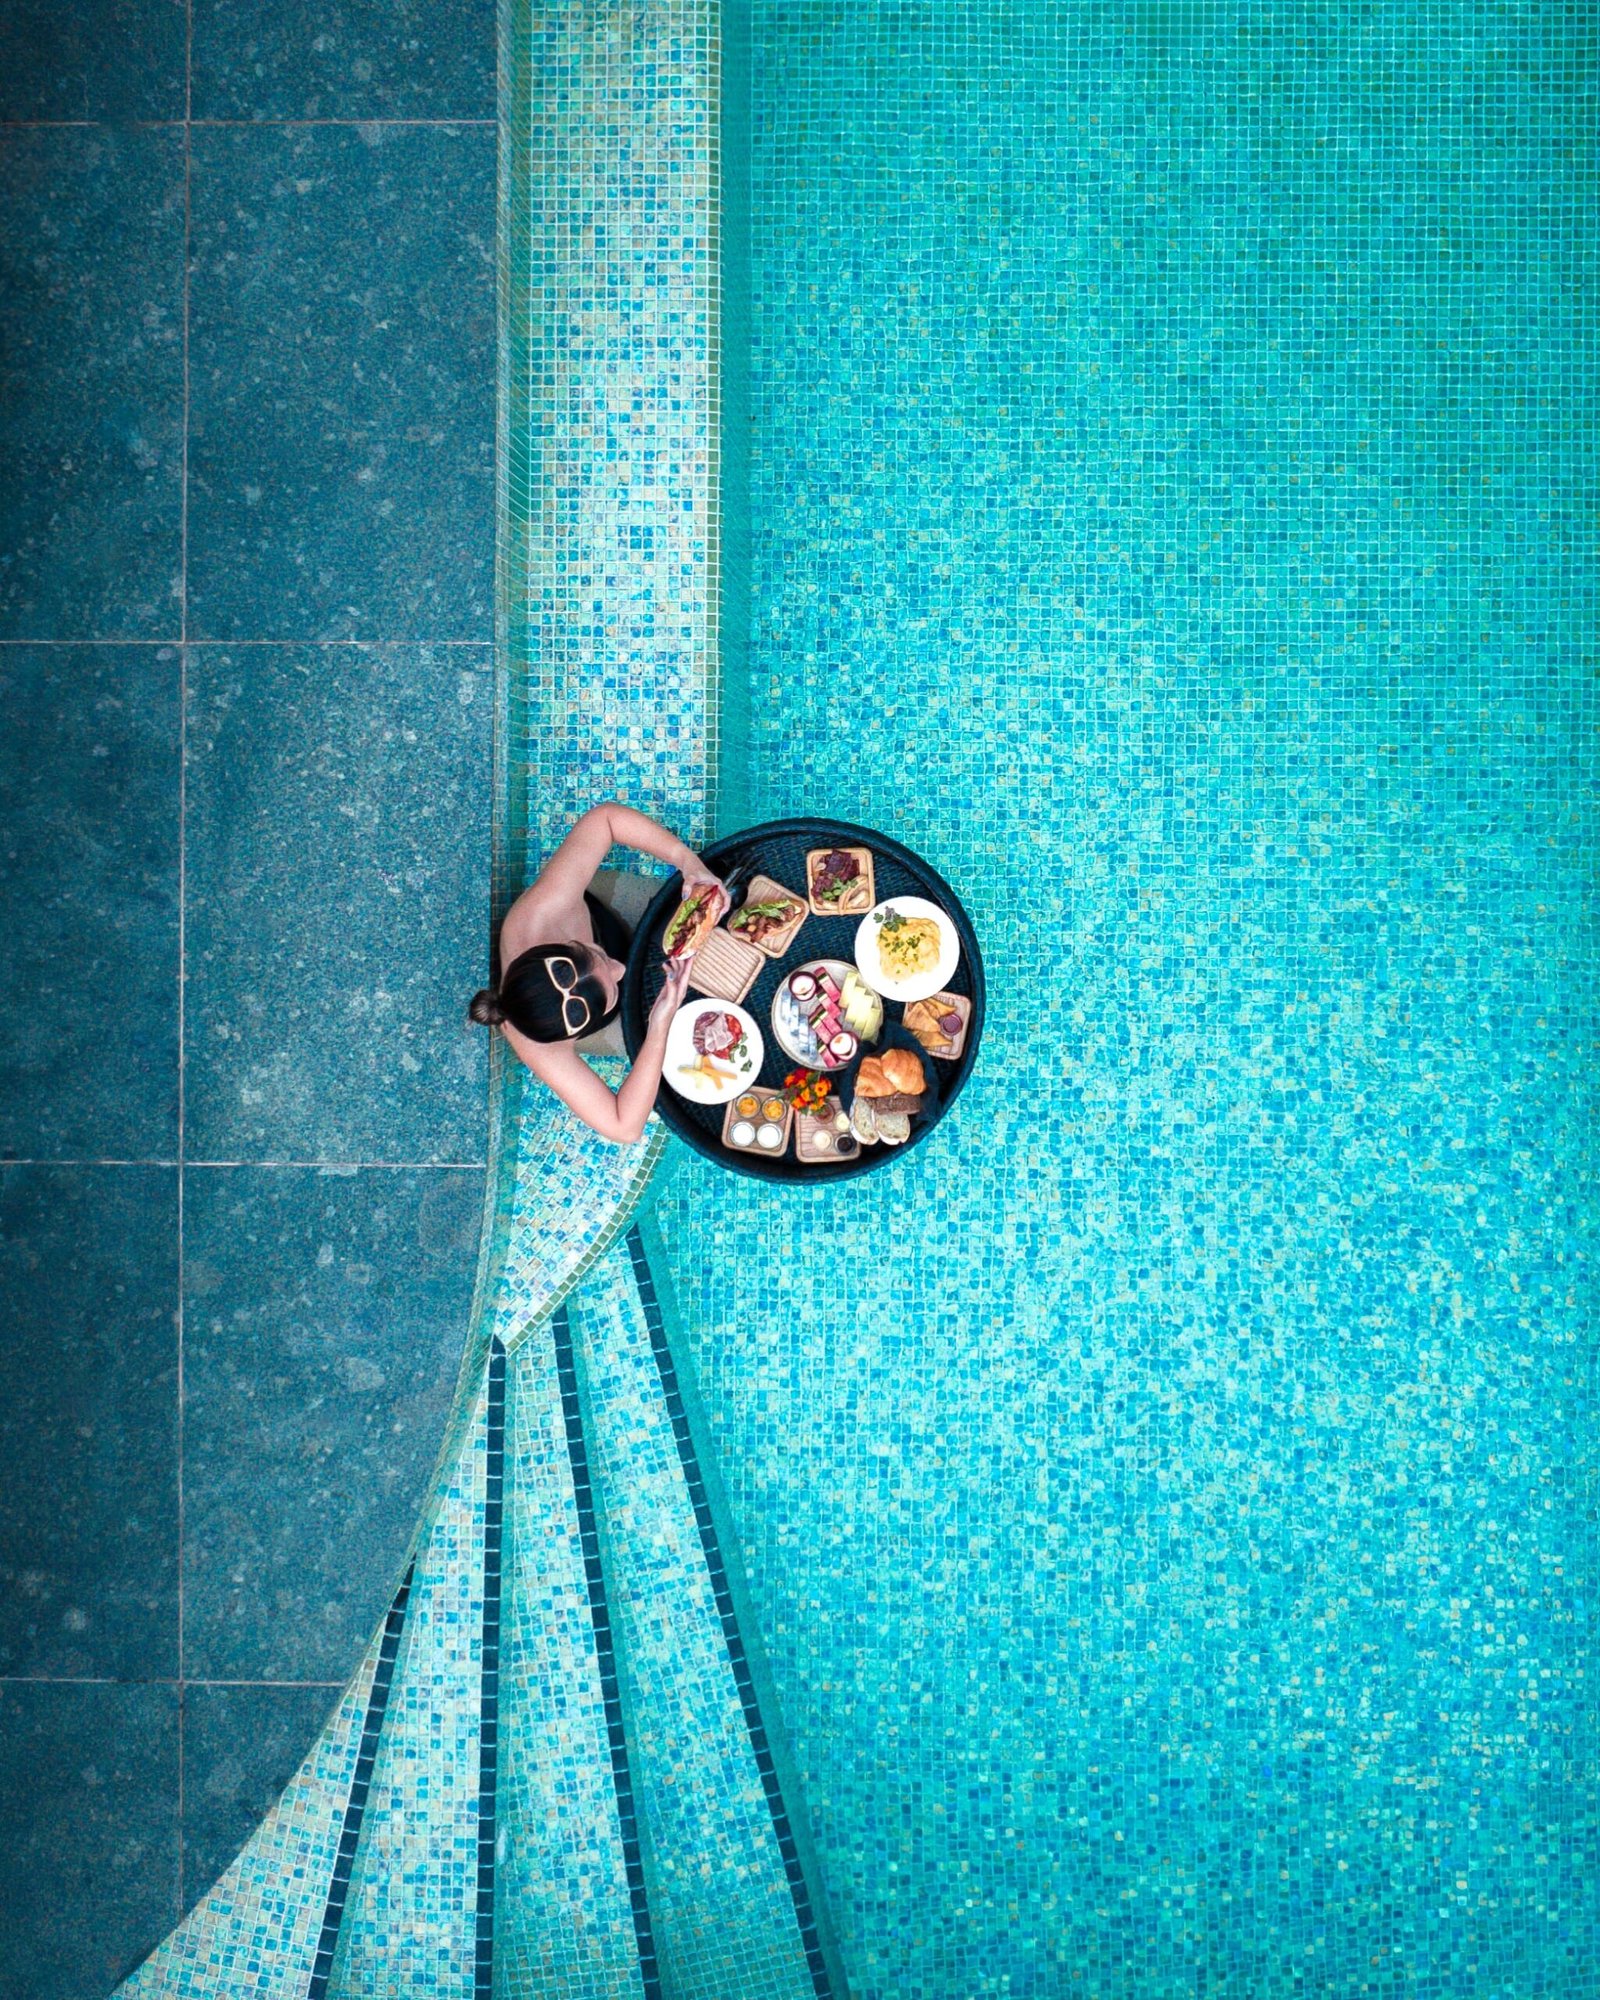 Top-down drone shot of a woman in a pool, enjoying a floating breakfast.